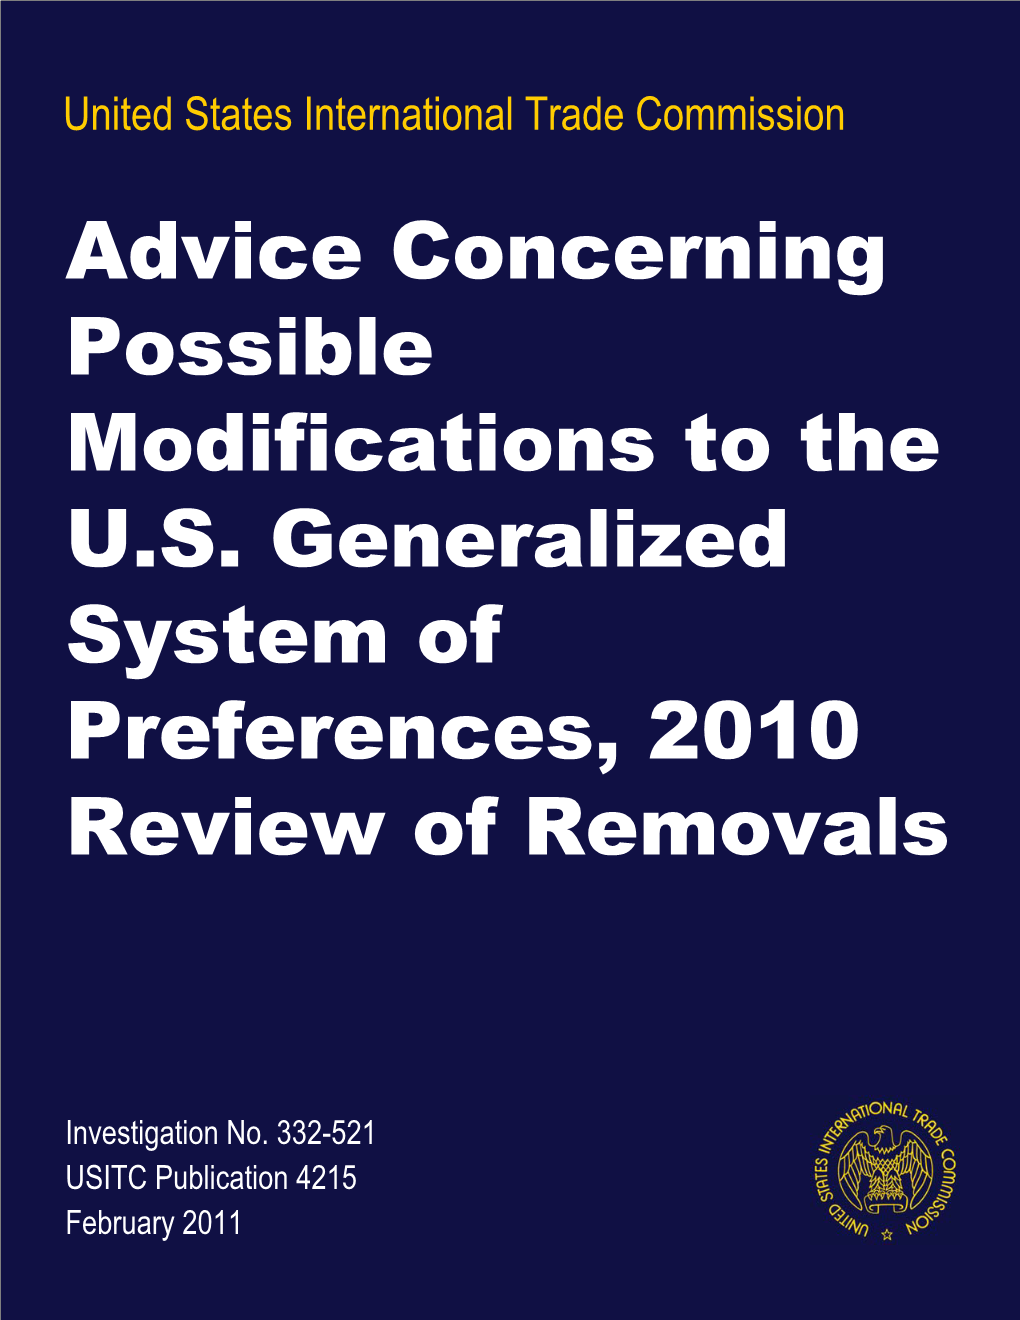 Advice Concerning Possible Modifications to the U.S. Generalized System of Preferences, 2010 Review of Removals